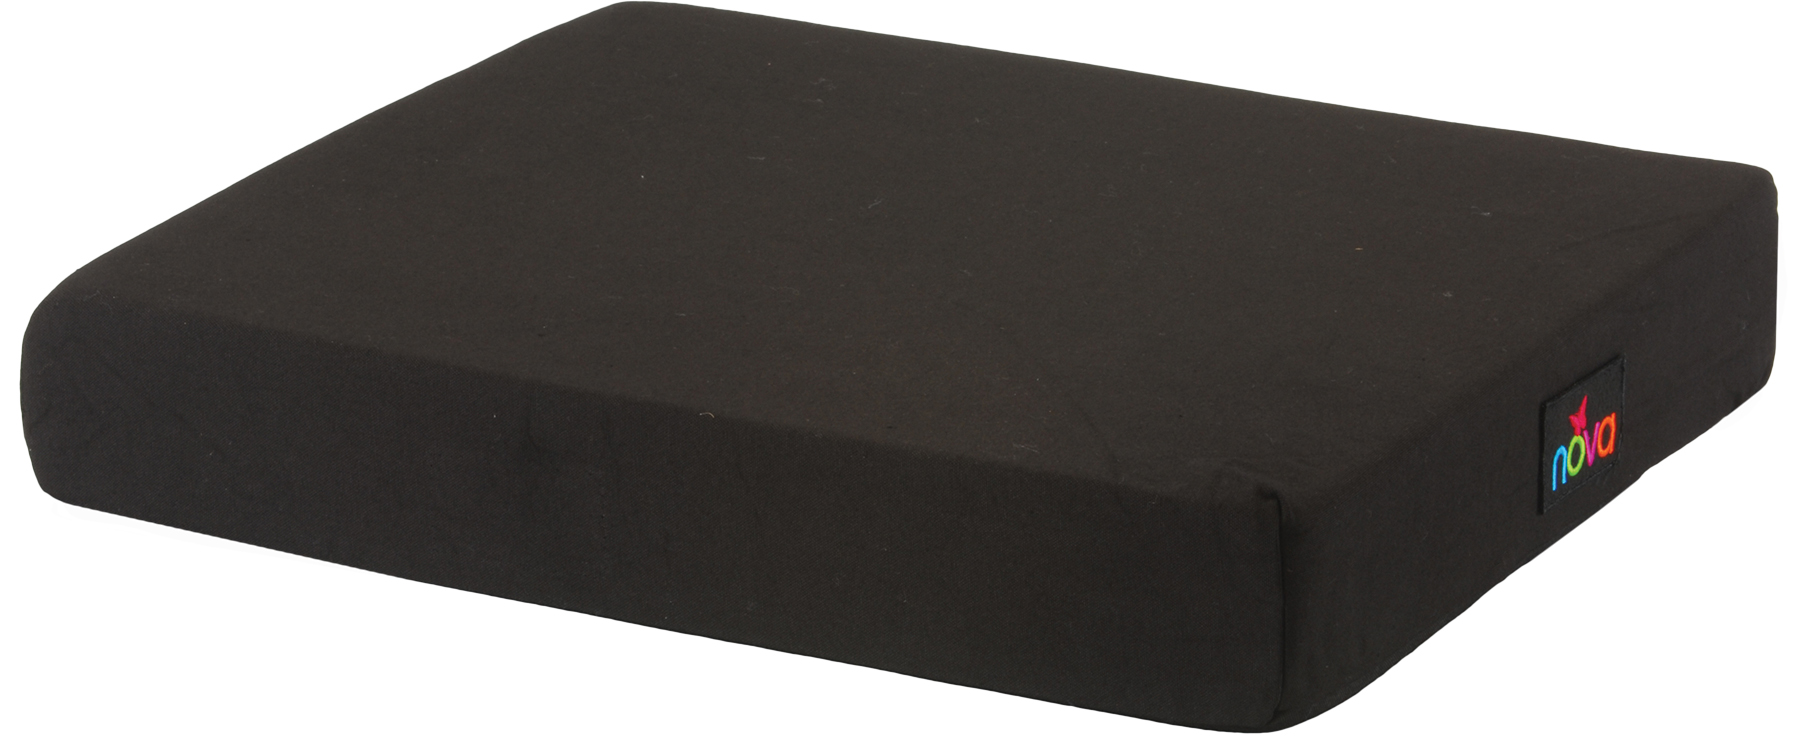 Drive Medical Molded General Use Wheelchair Seat Cushion 16x16x1.75 inch  Black